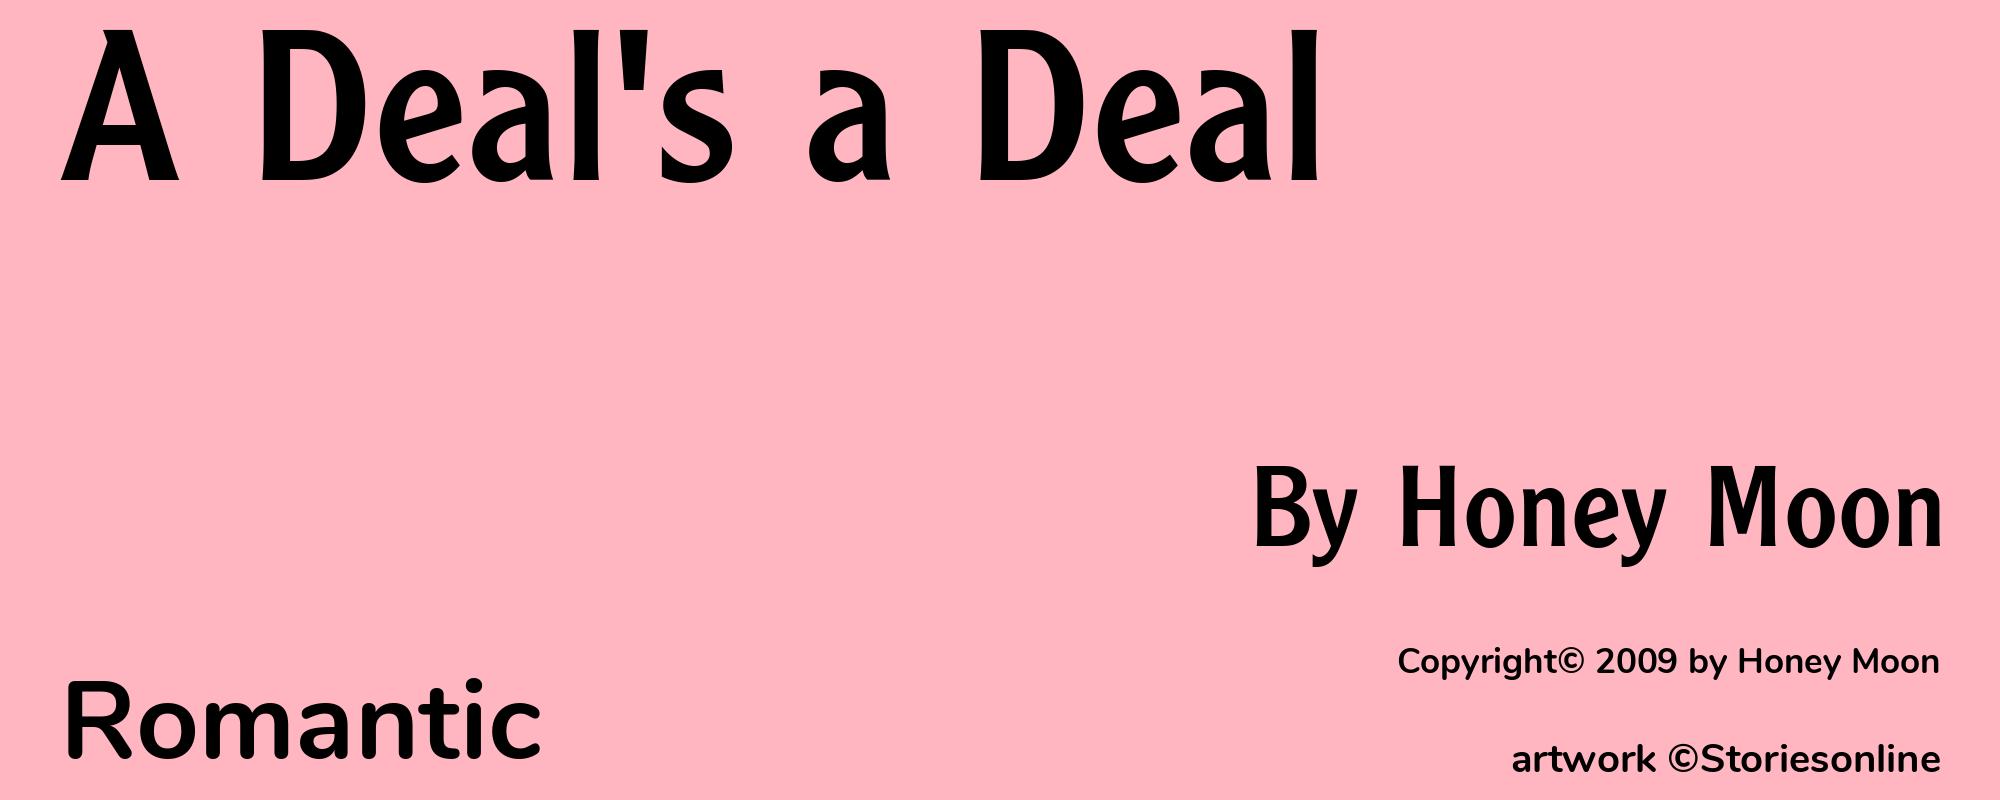 A Deal's a Deal - Cover